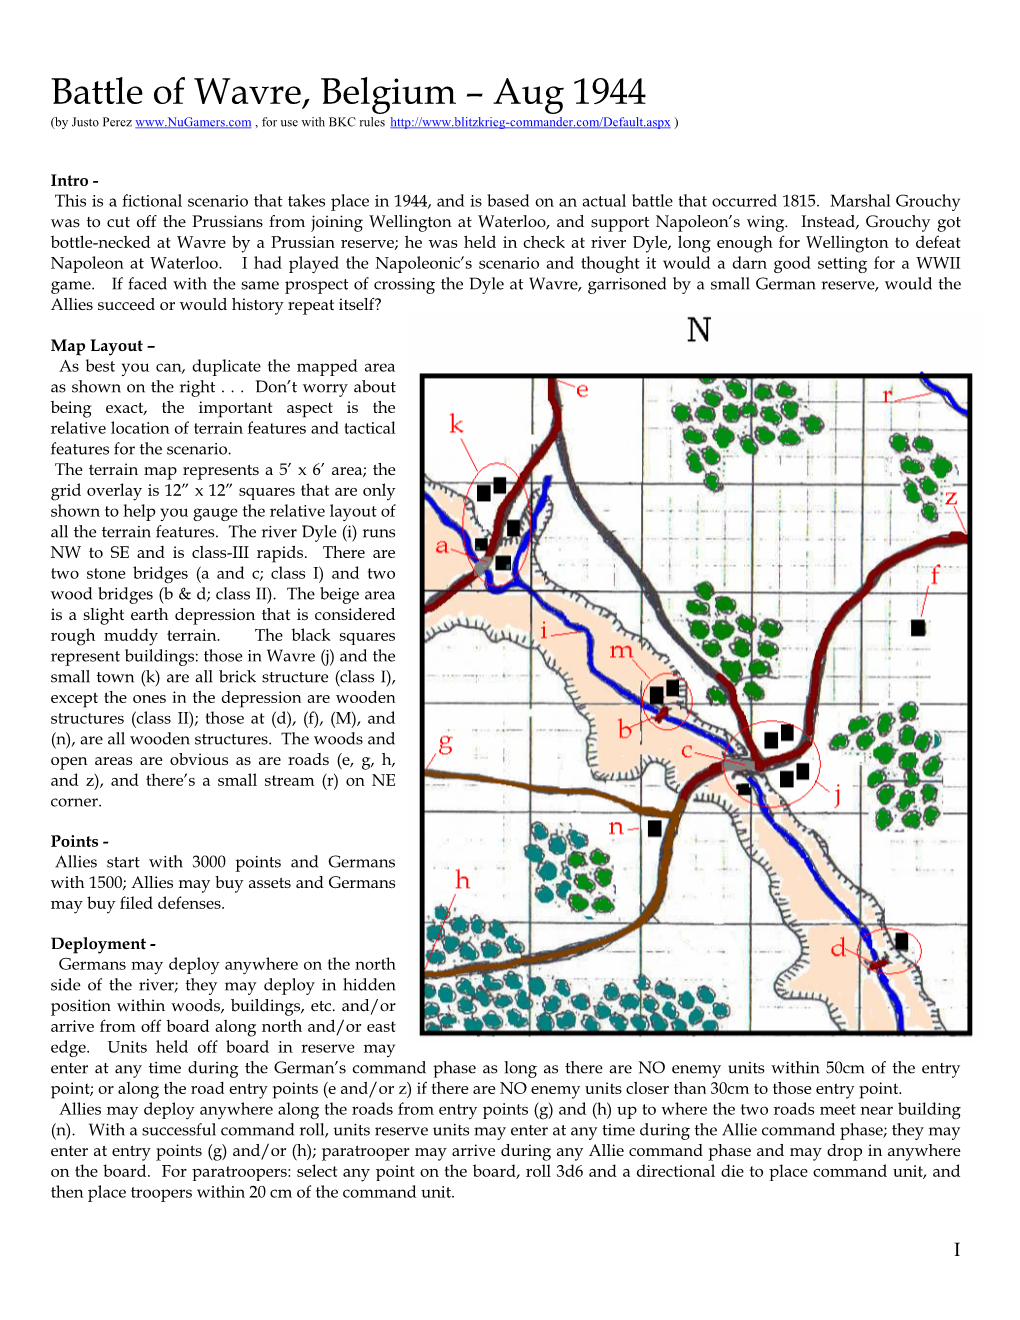 Battle of Wavre, Belgium – Aug 1944 (By Justo Perez , for Use with BKC Rules )